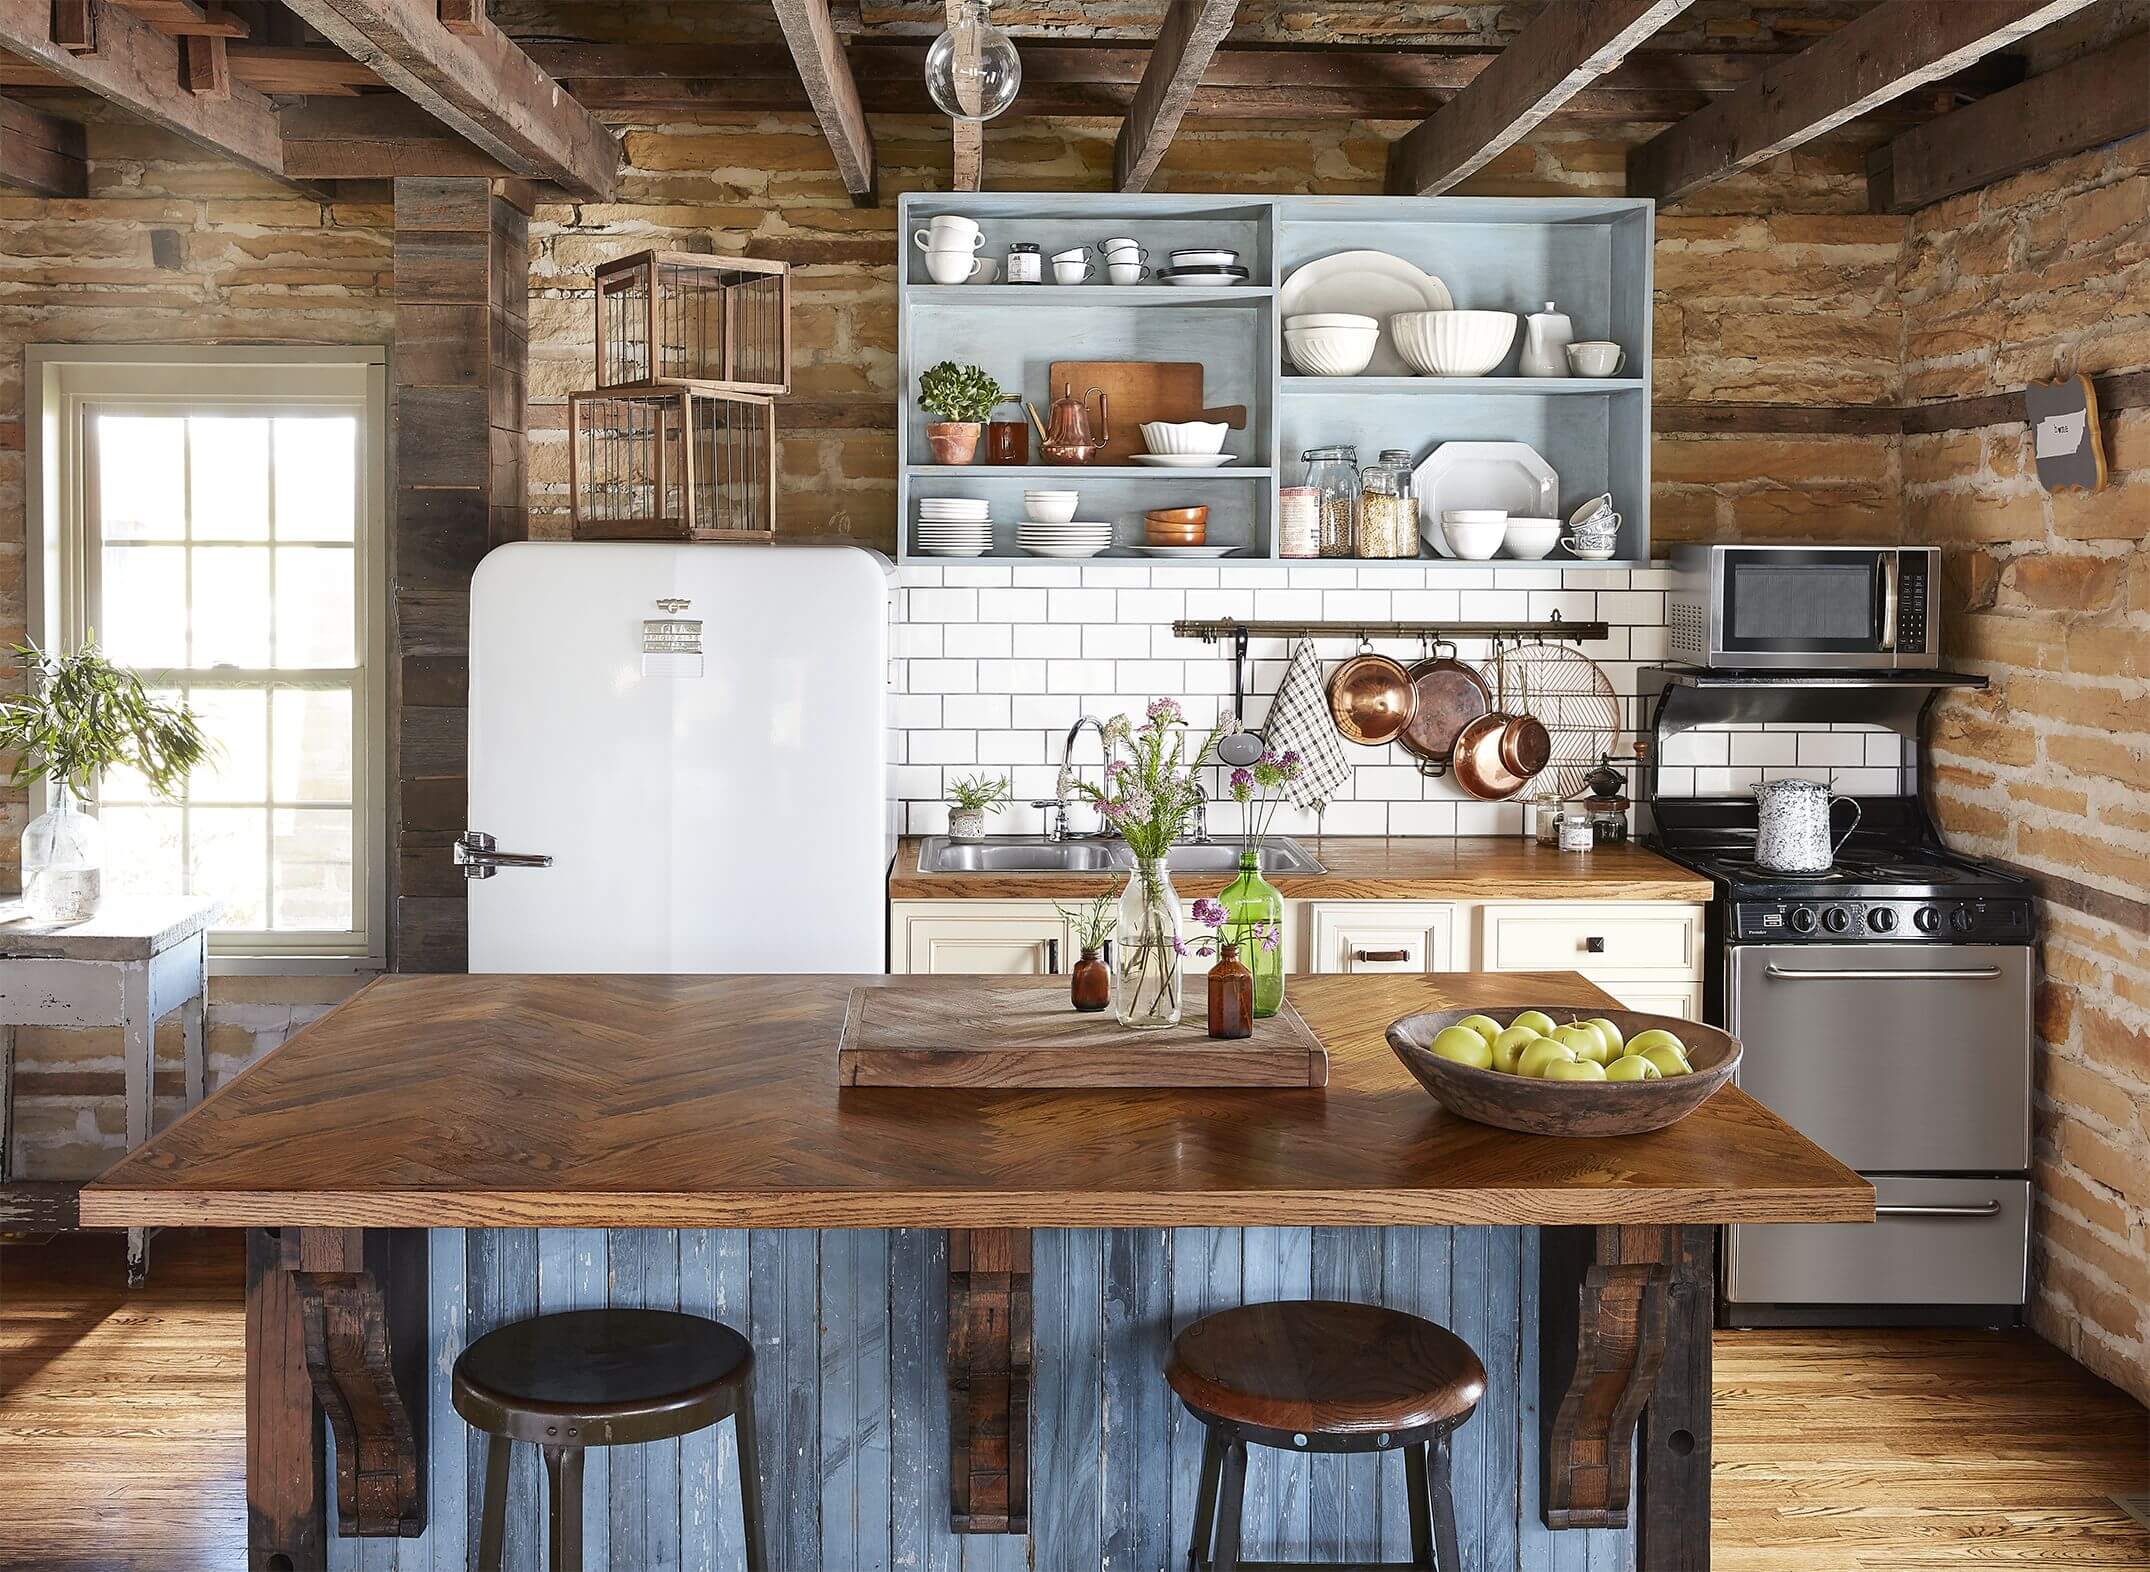 34 Farmhouse Kitchen Ideas for the Perfect Rustic Vibe